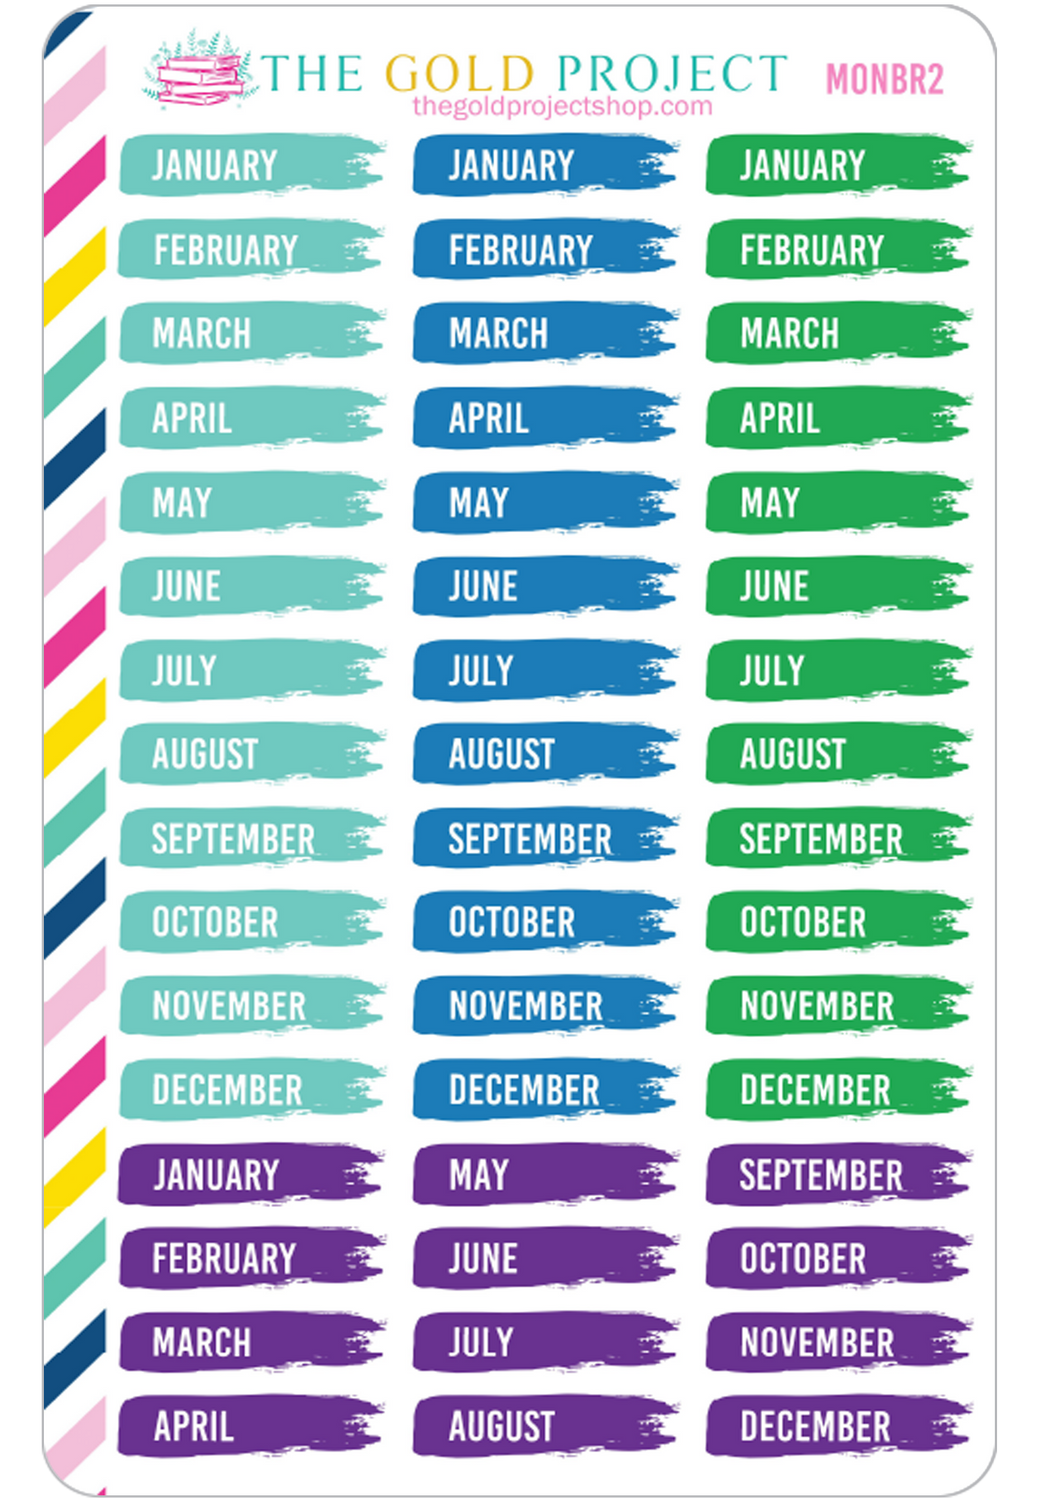 Months of the Year Brush Strokes - Cool